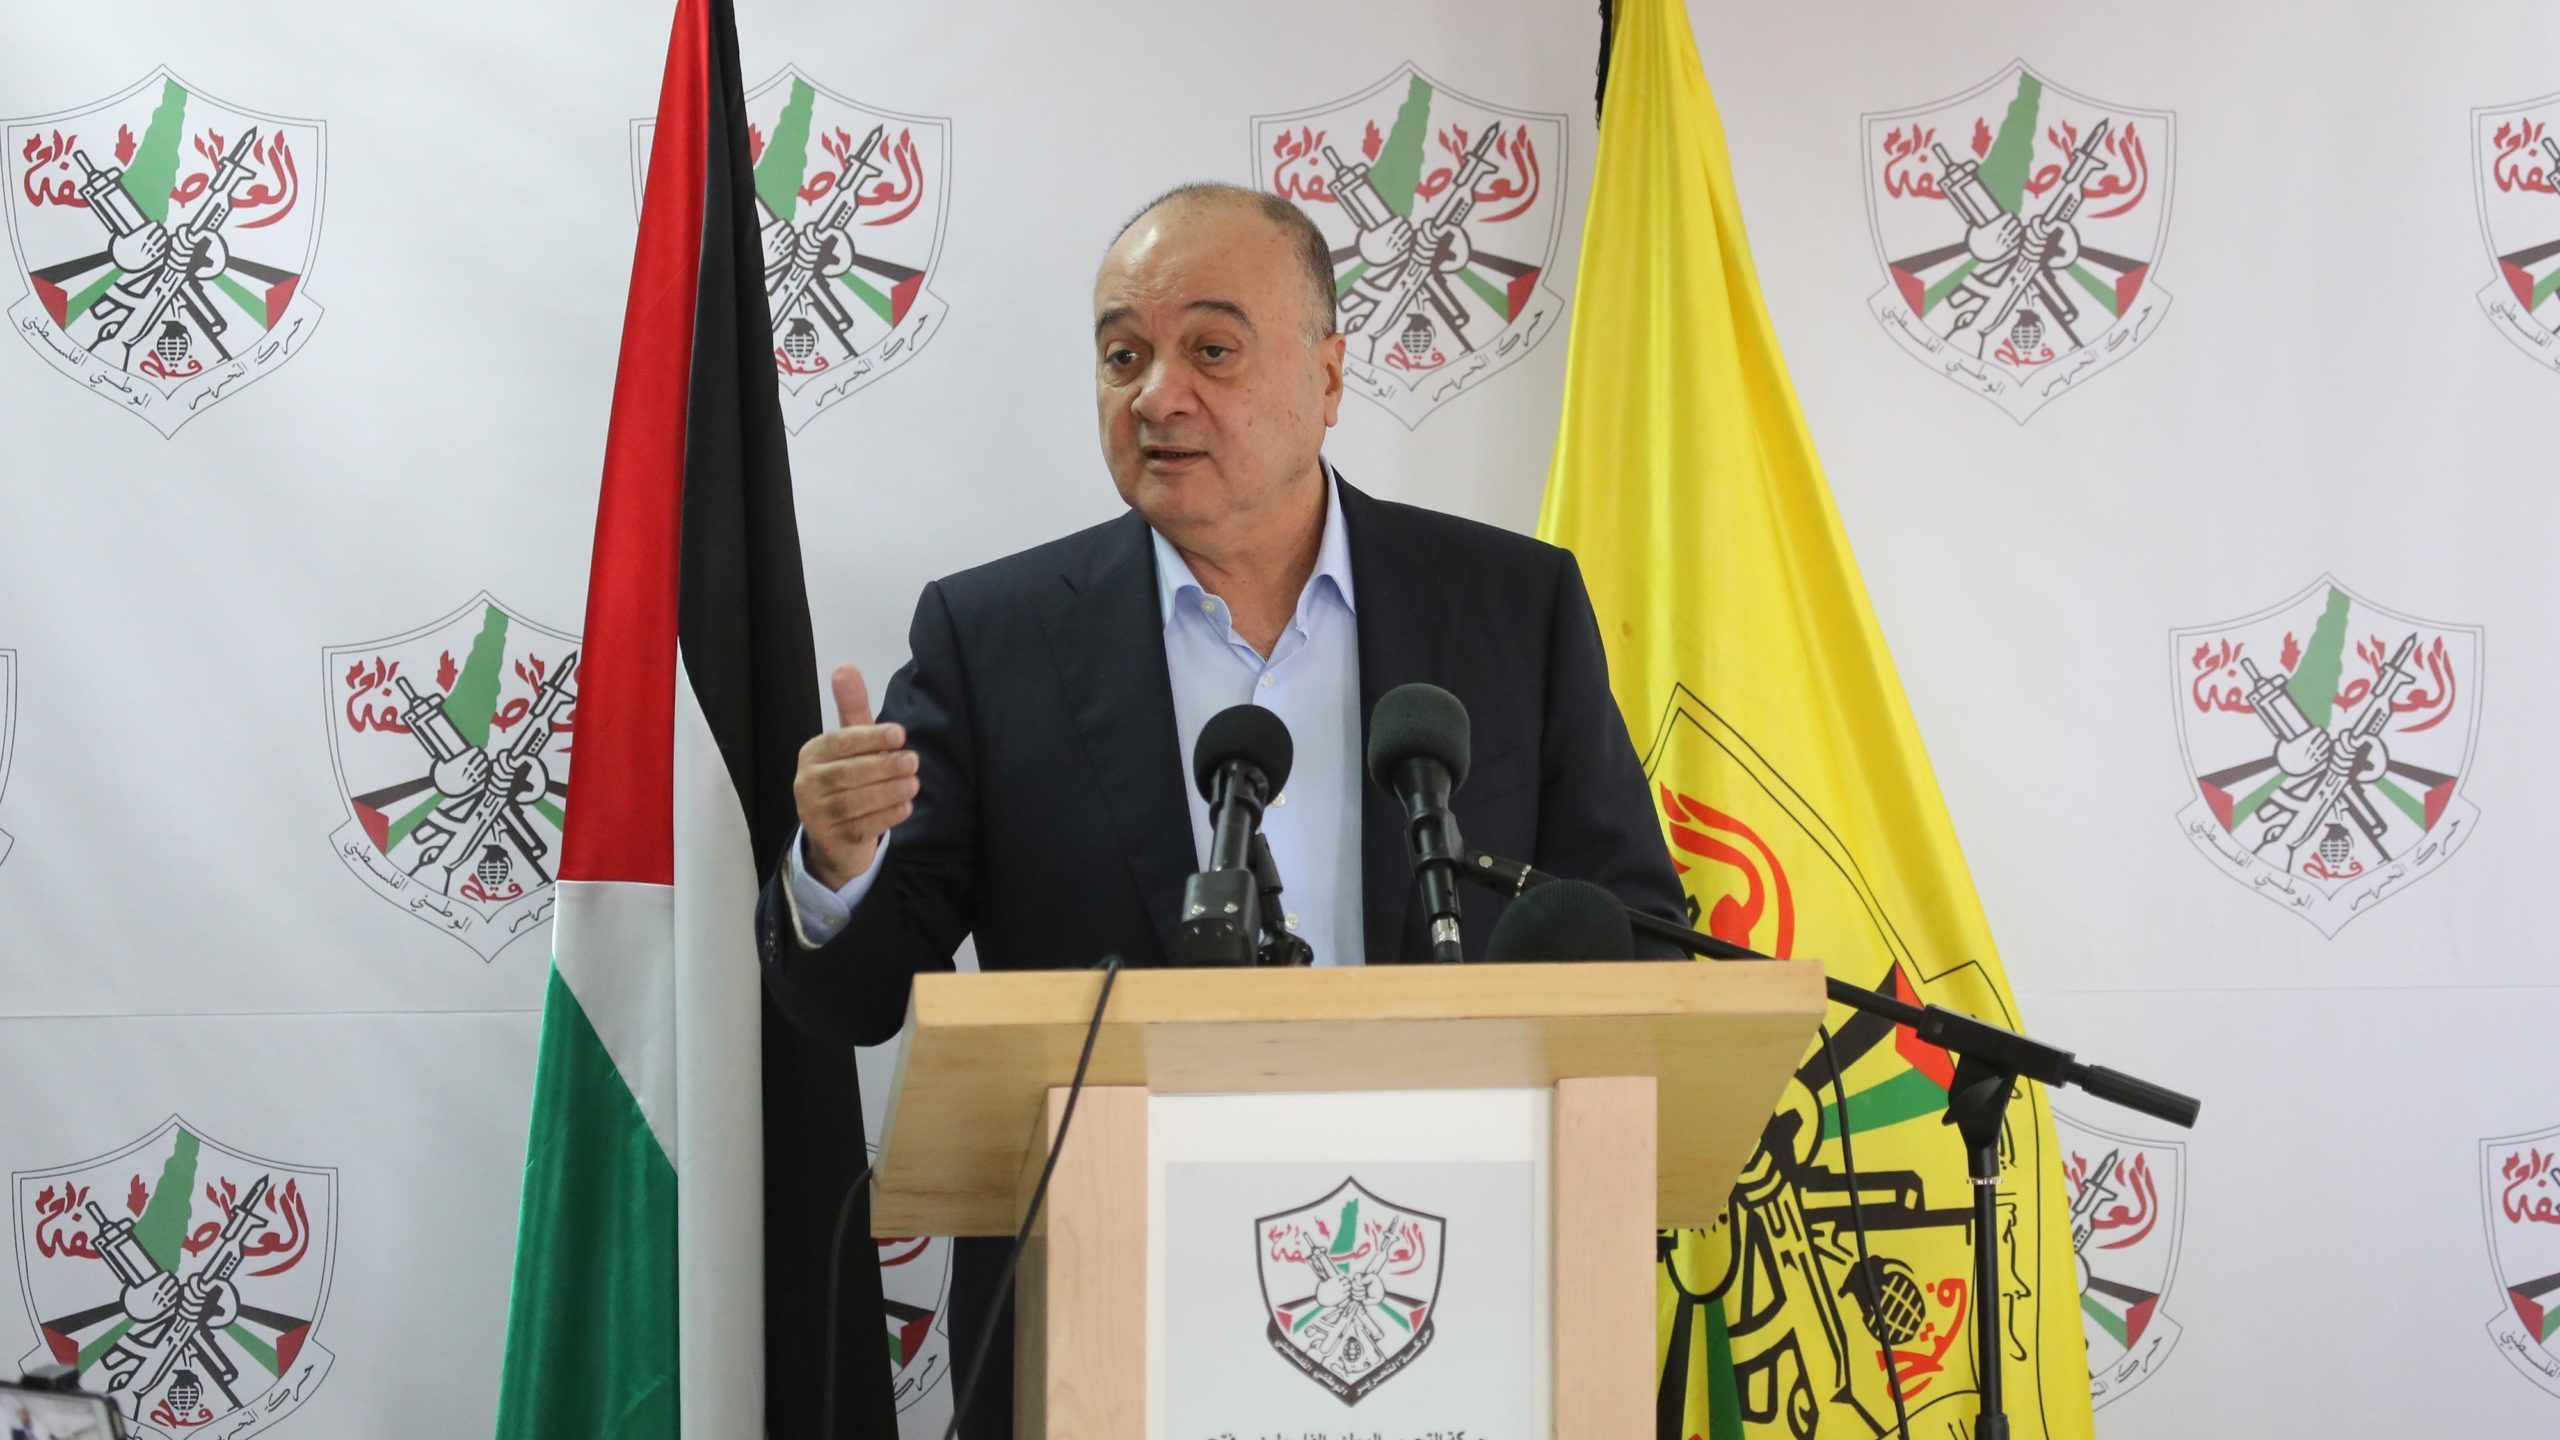 Abbas Expels Top Fatah Official for Opposing Him